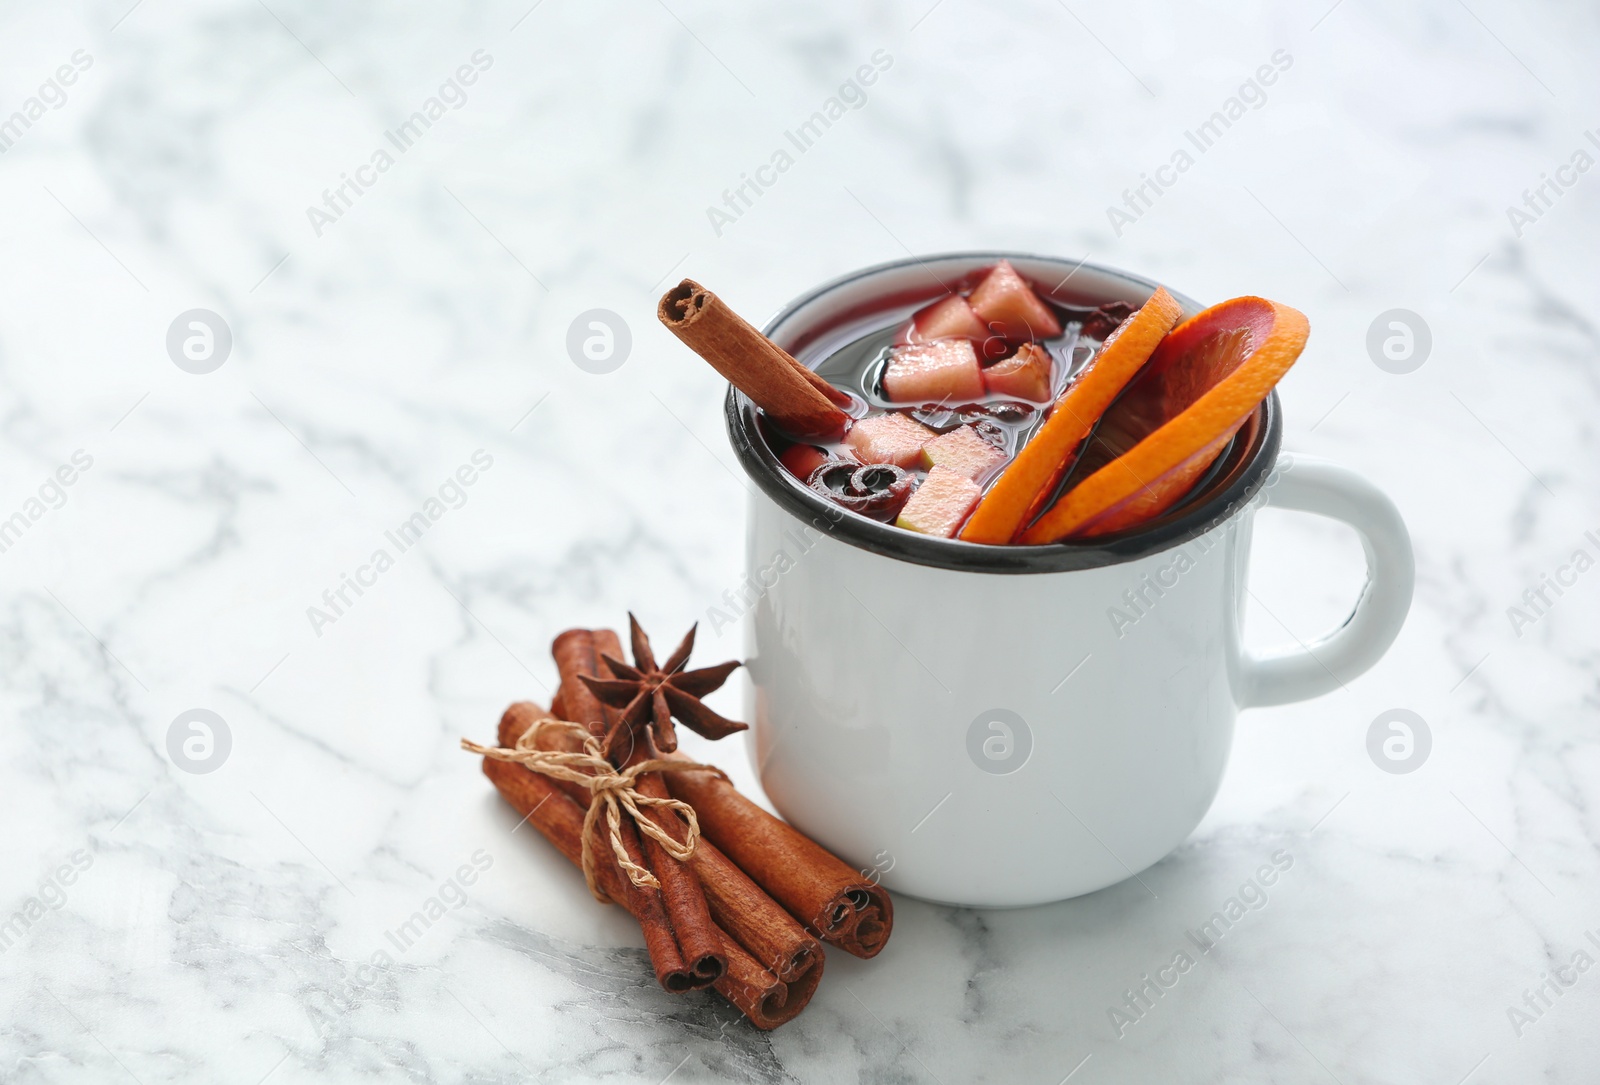 Photo of Mug with red mulled wine on marble table